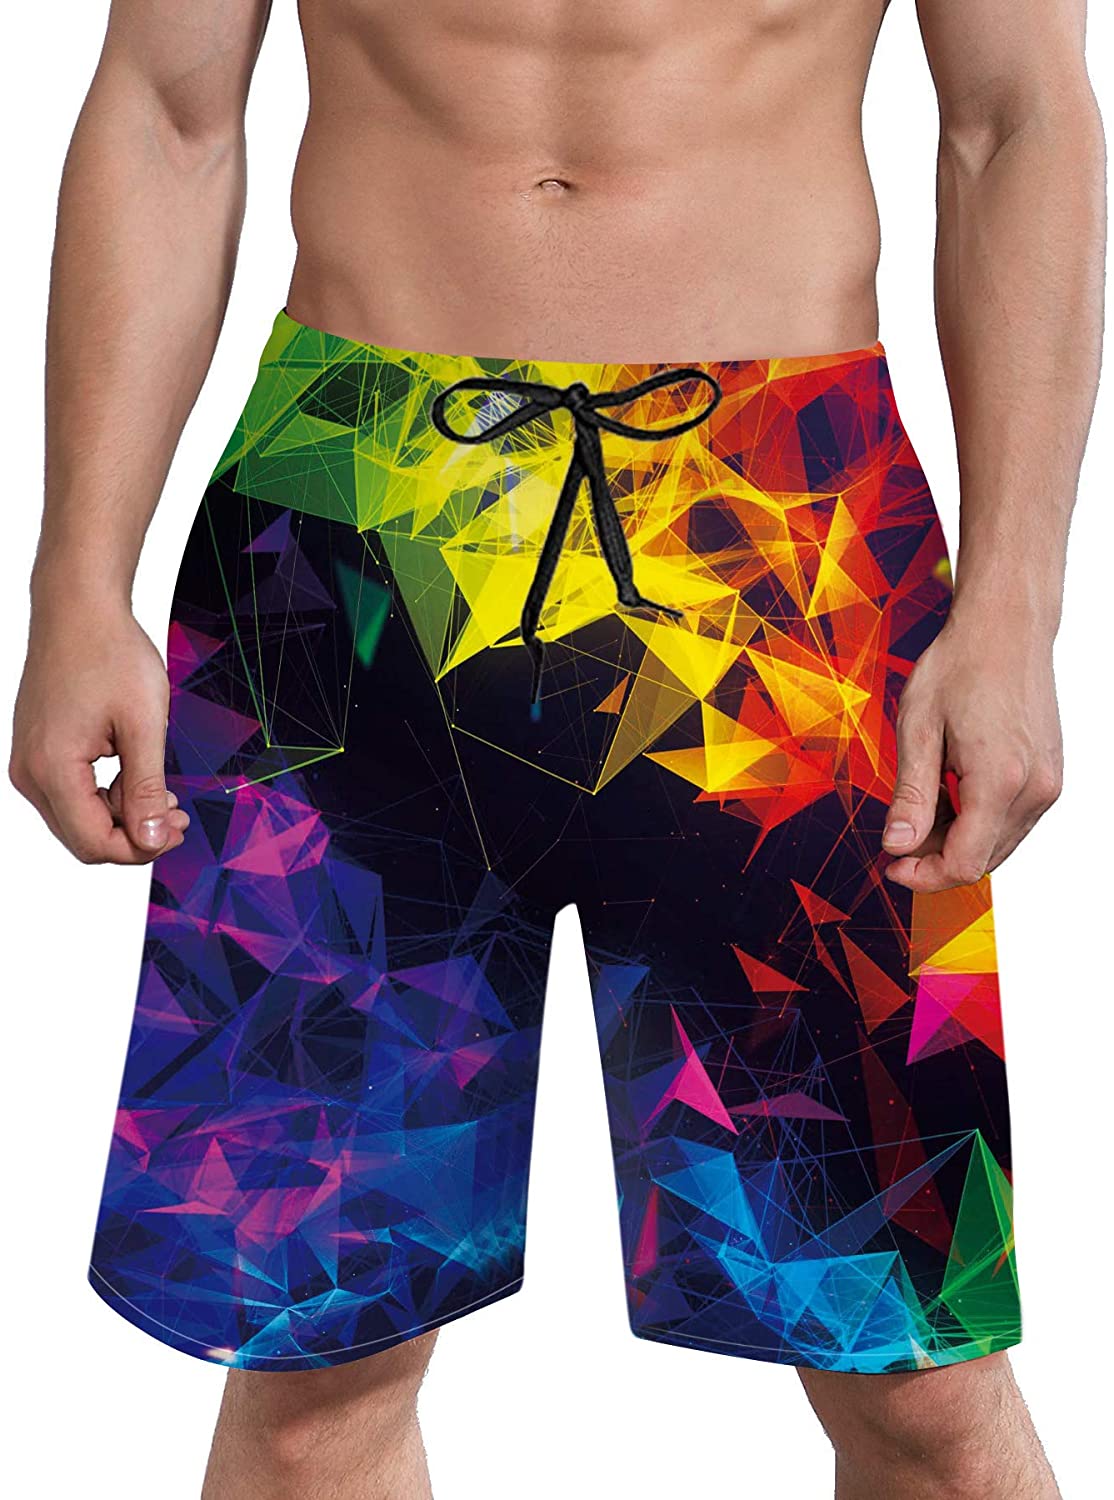 ALISISTER Mens Boy Swim Trunks 3D Print Quick Dry Summer Surf Beach Board Shorts with Mesh Lining 